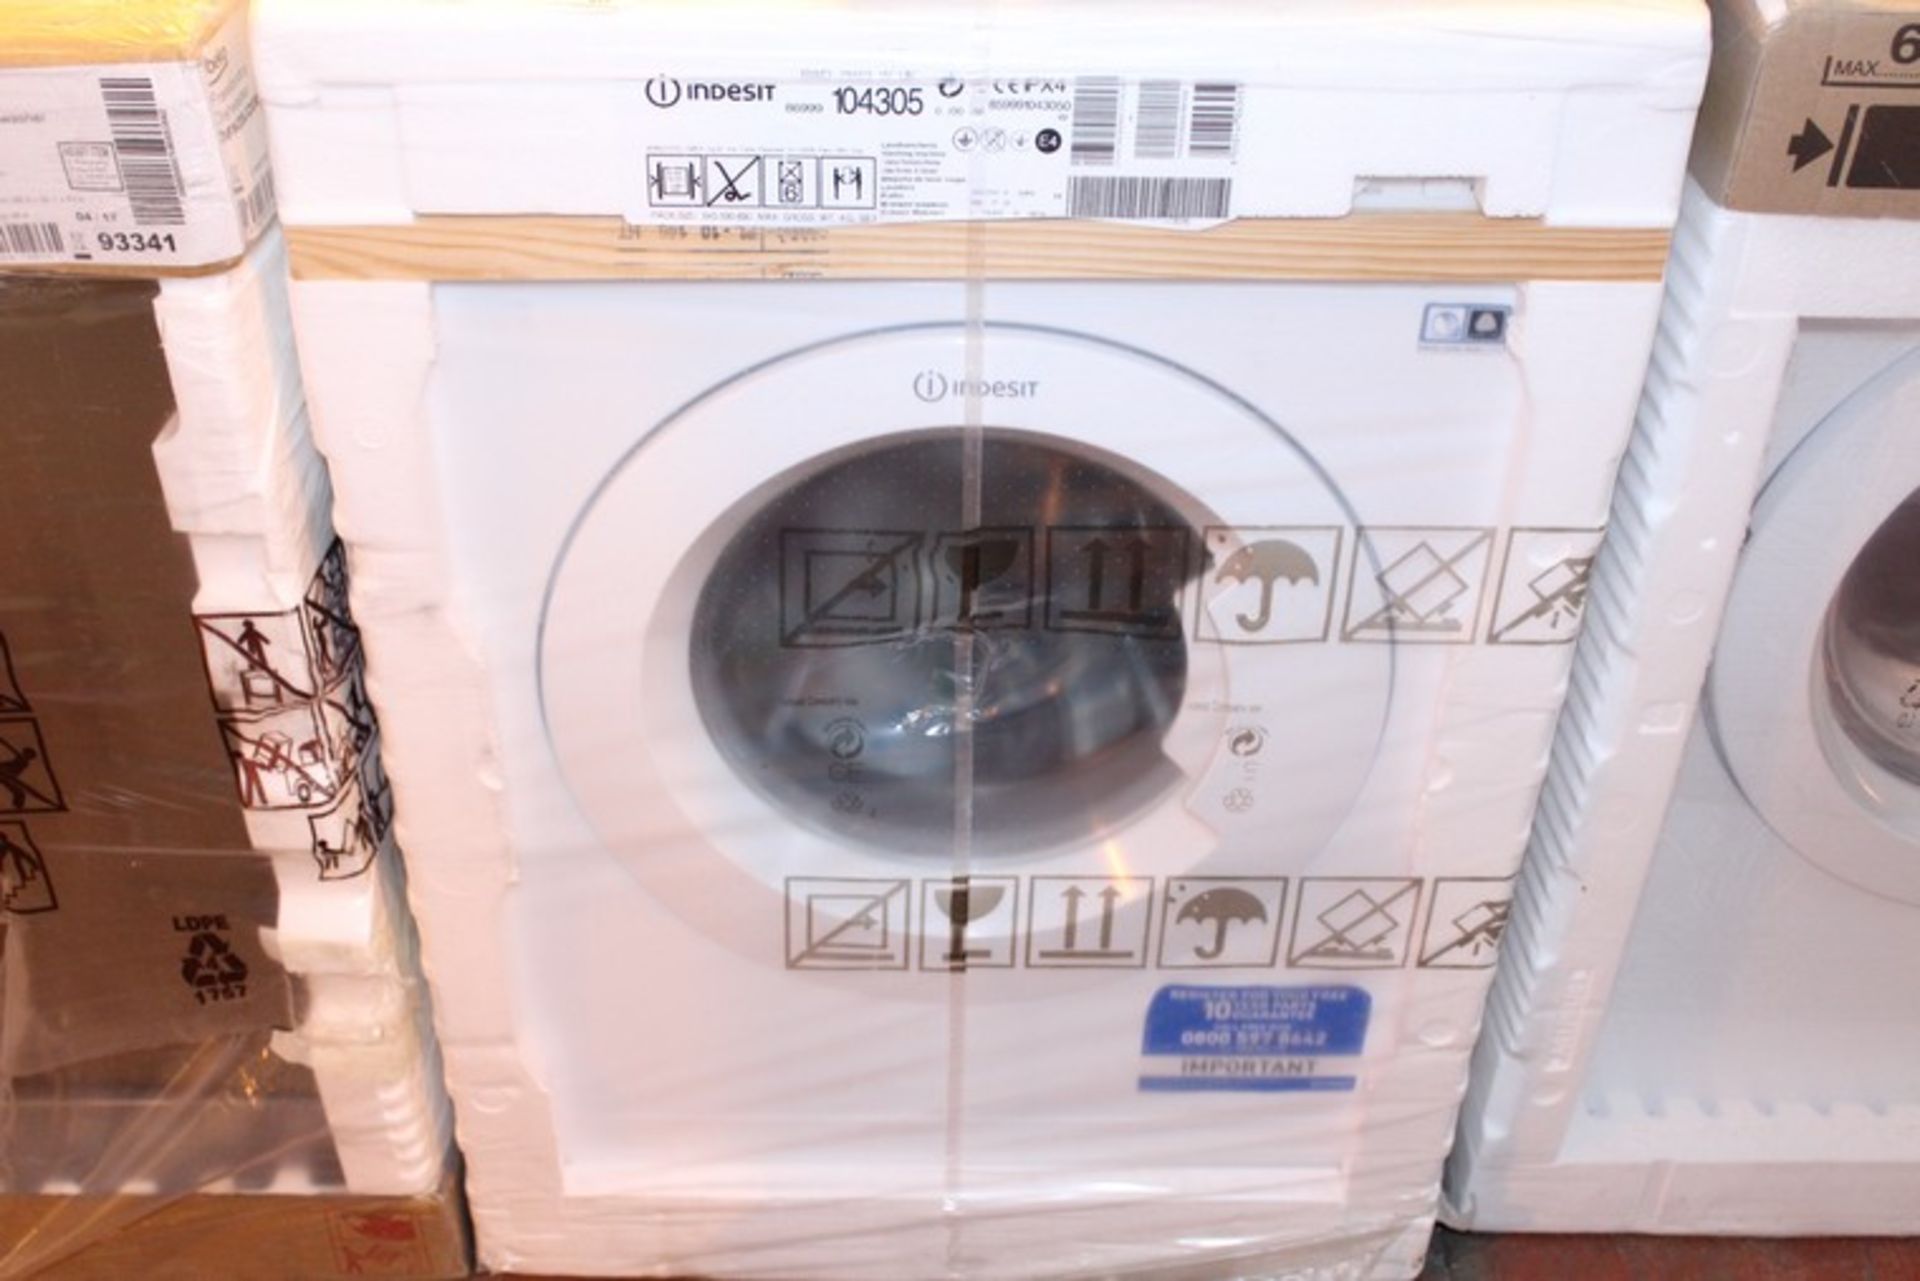 1 x BOXED INDESIT BWD71453W WASHER DRYER RRP £360 (12/10/17) (2549145) *PLEASE NOTE THAT THE BID